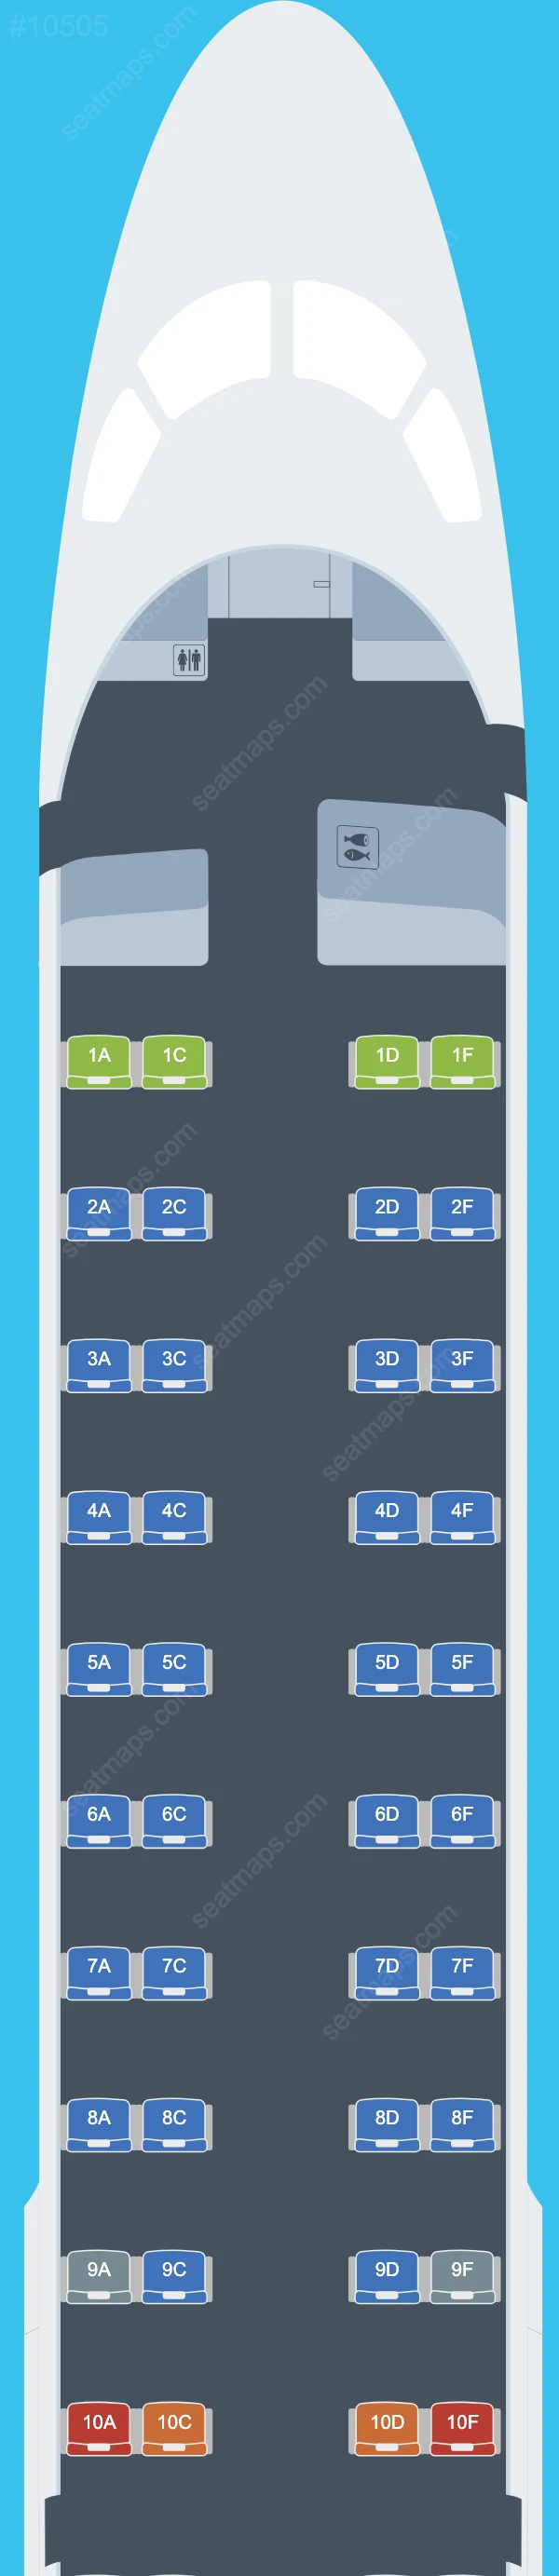 German Airways Embraer E190 seatmap mobile preview